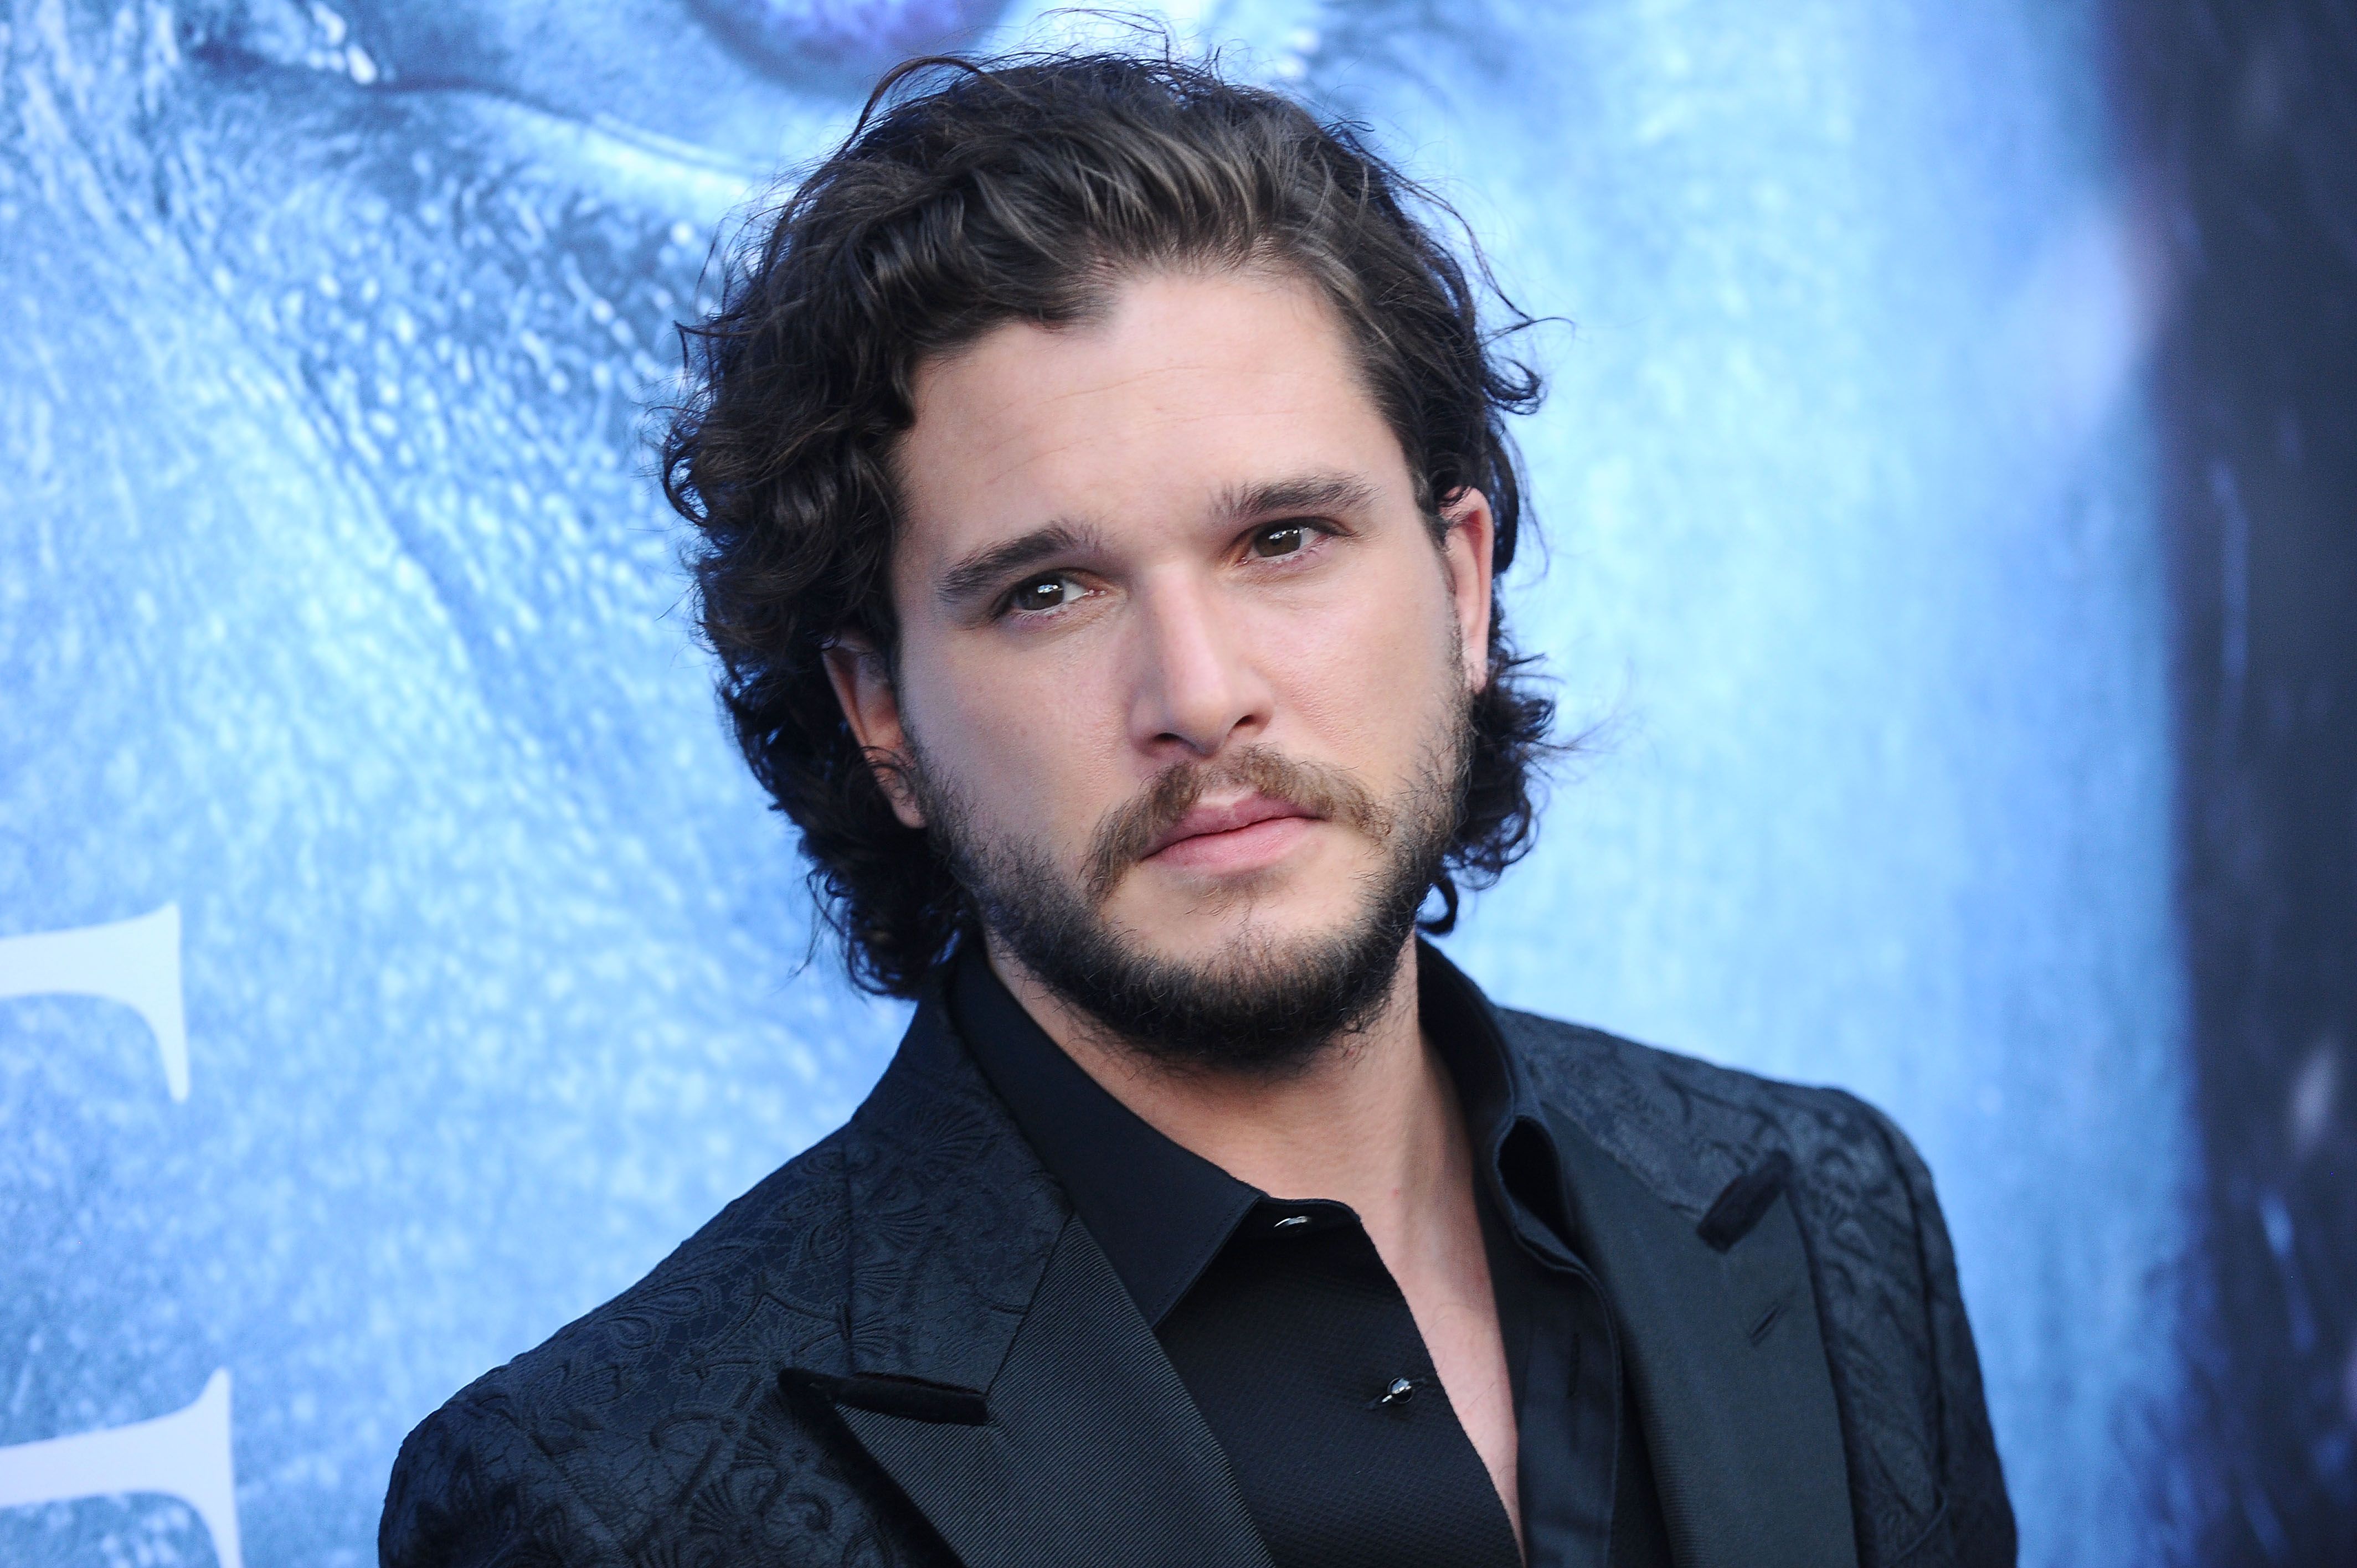 Game of Thrones star Kit Harington enter treatment to deal with 